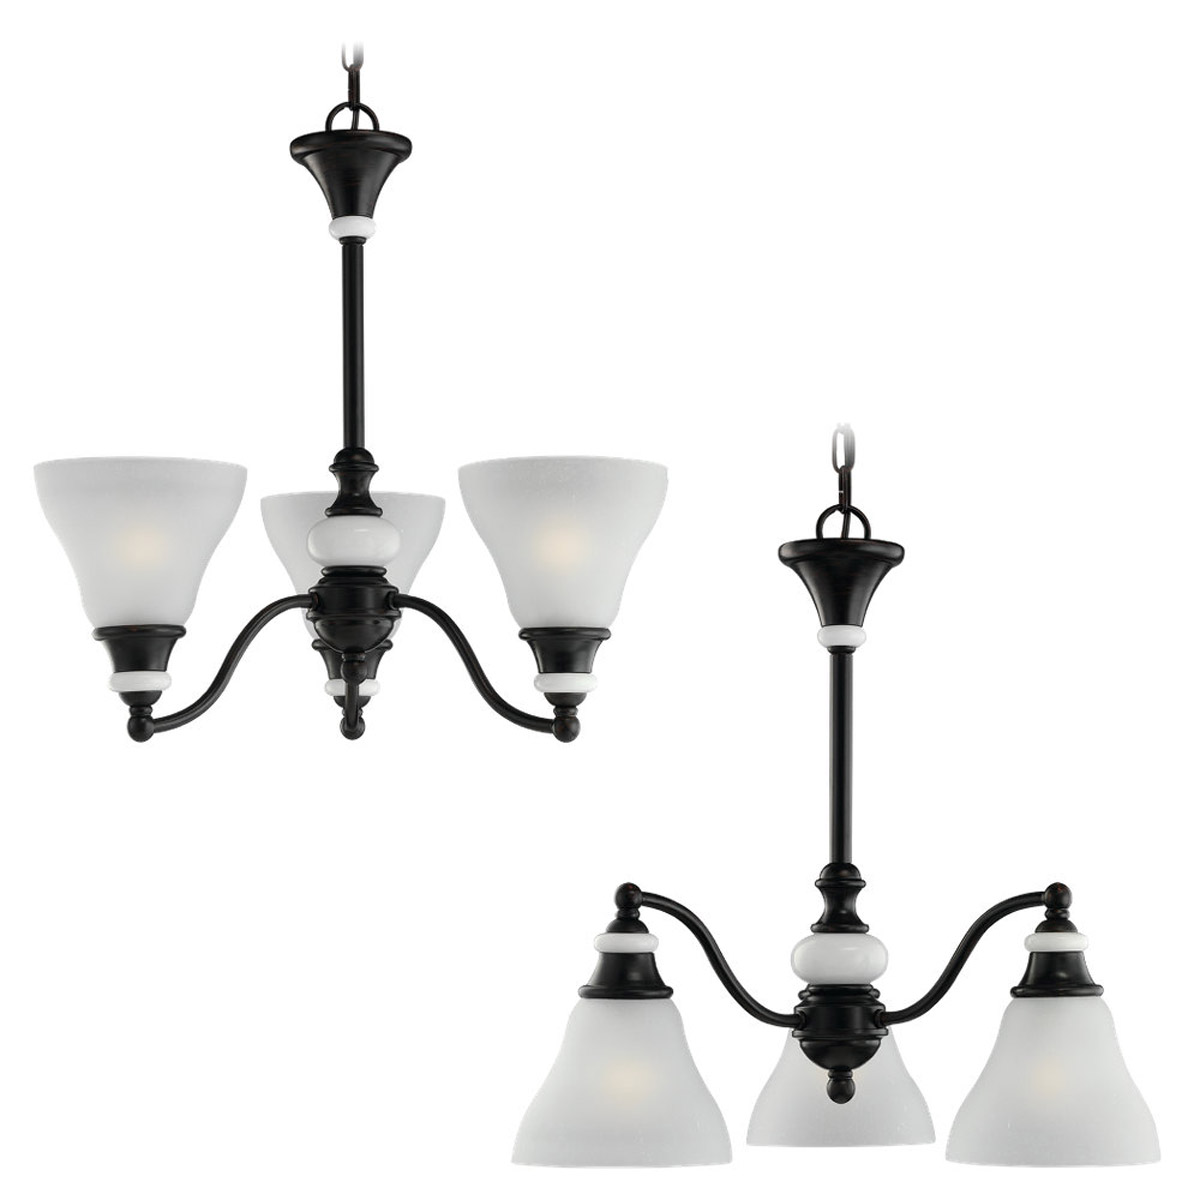 Sea Gull Lighting Brixham 3 Light Chandelier in Rustic Bronze with Ceramic Style Inlay 31590-855